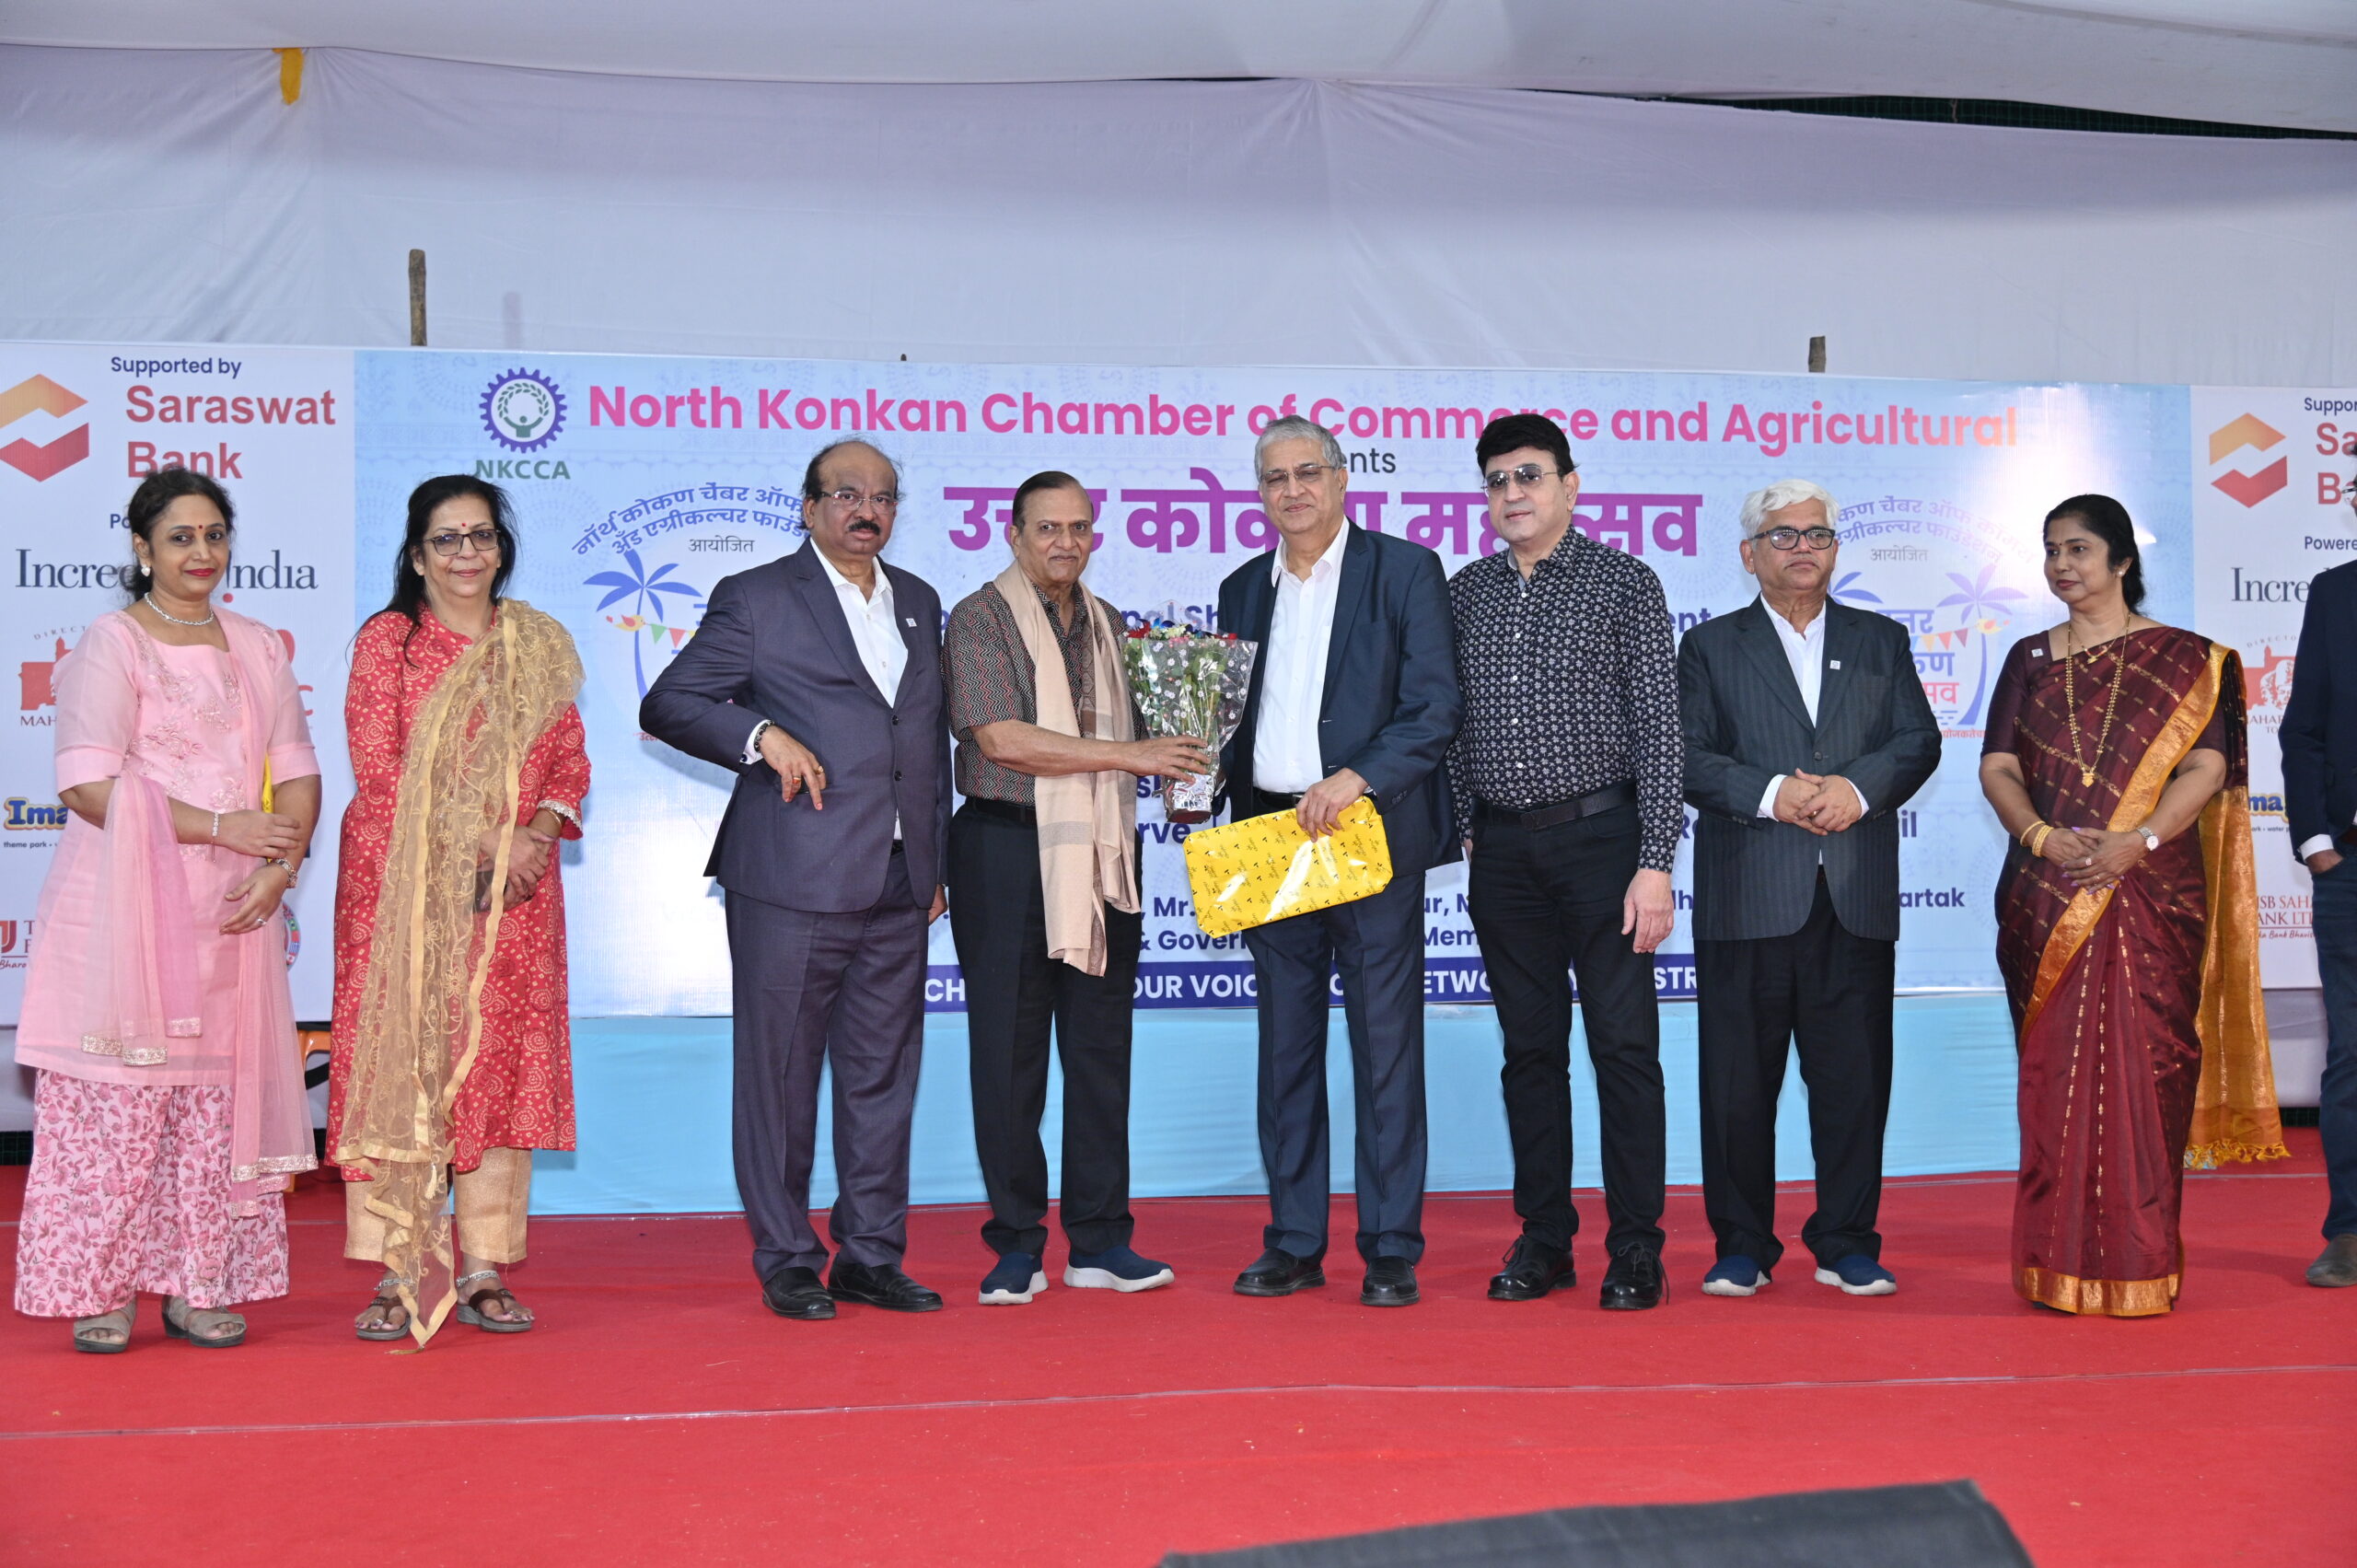 Welcome To The North Konkan Chamber of Commerce and Agricultural Foundation